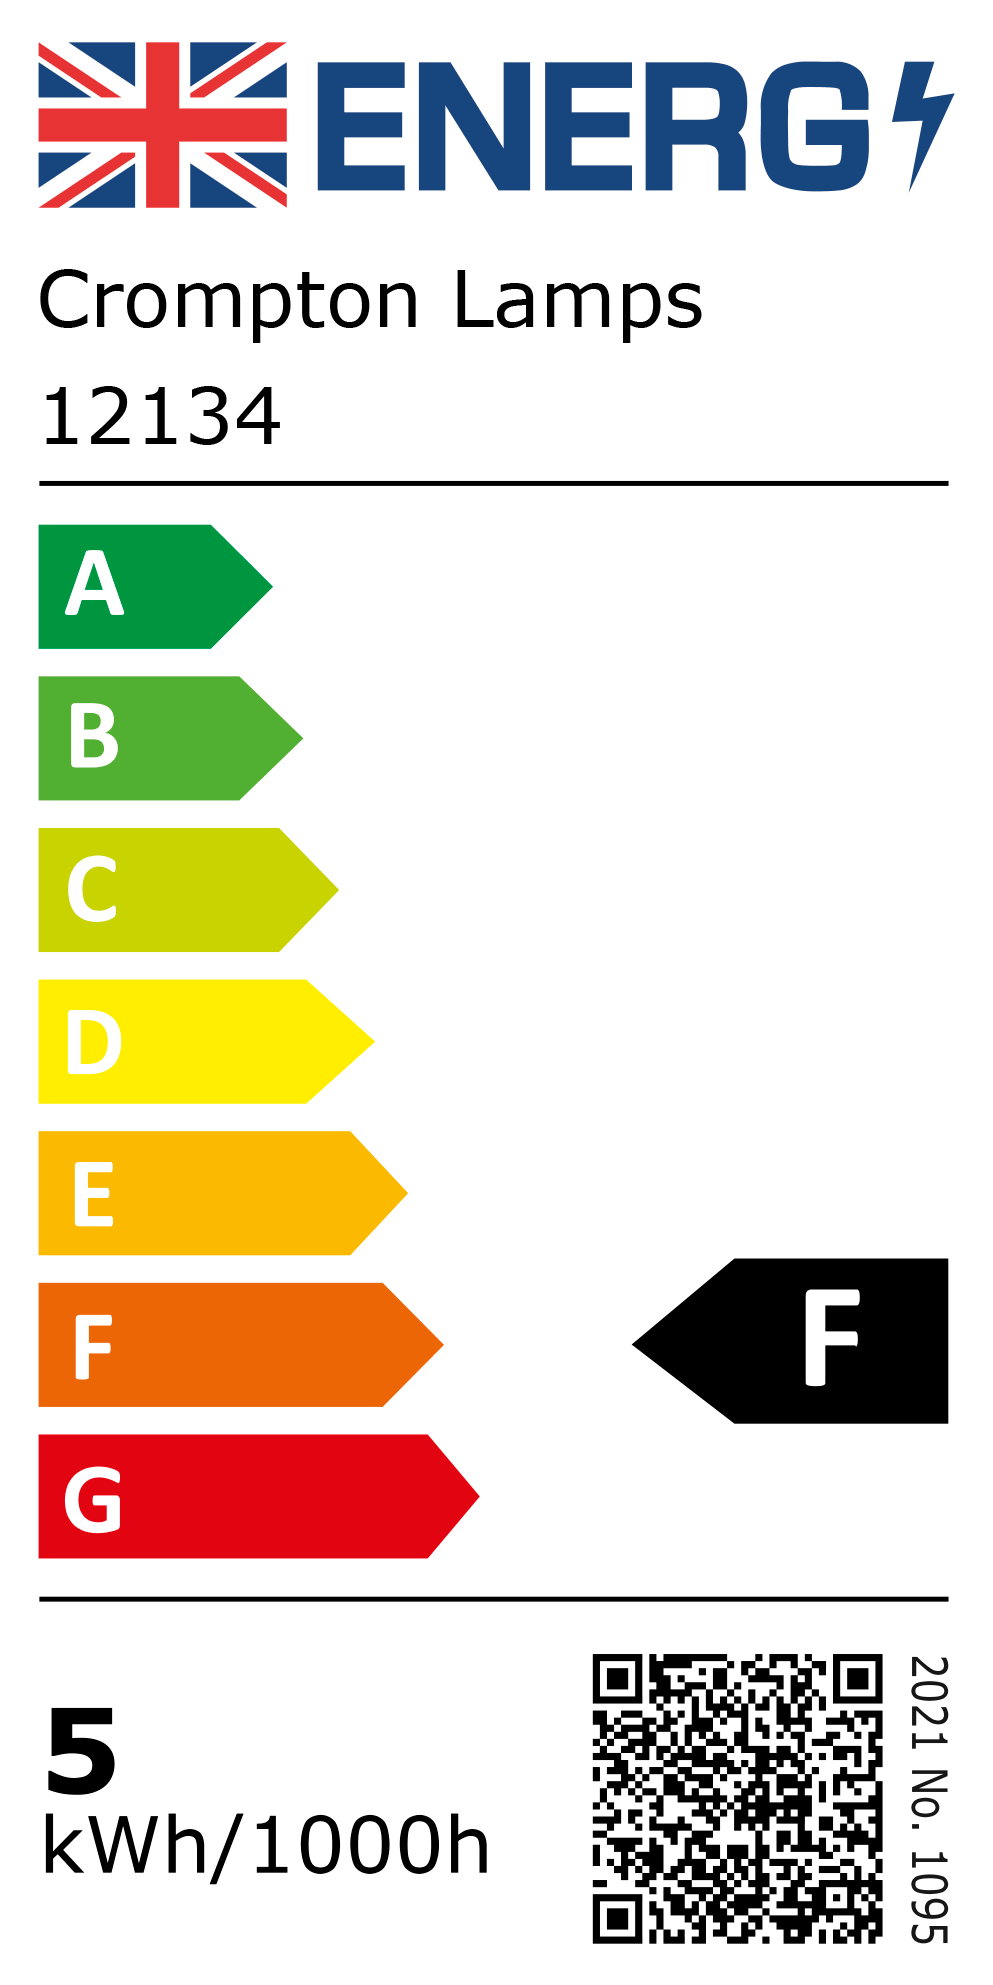 New 2021 Energy Rating Label: Stock Code 12134